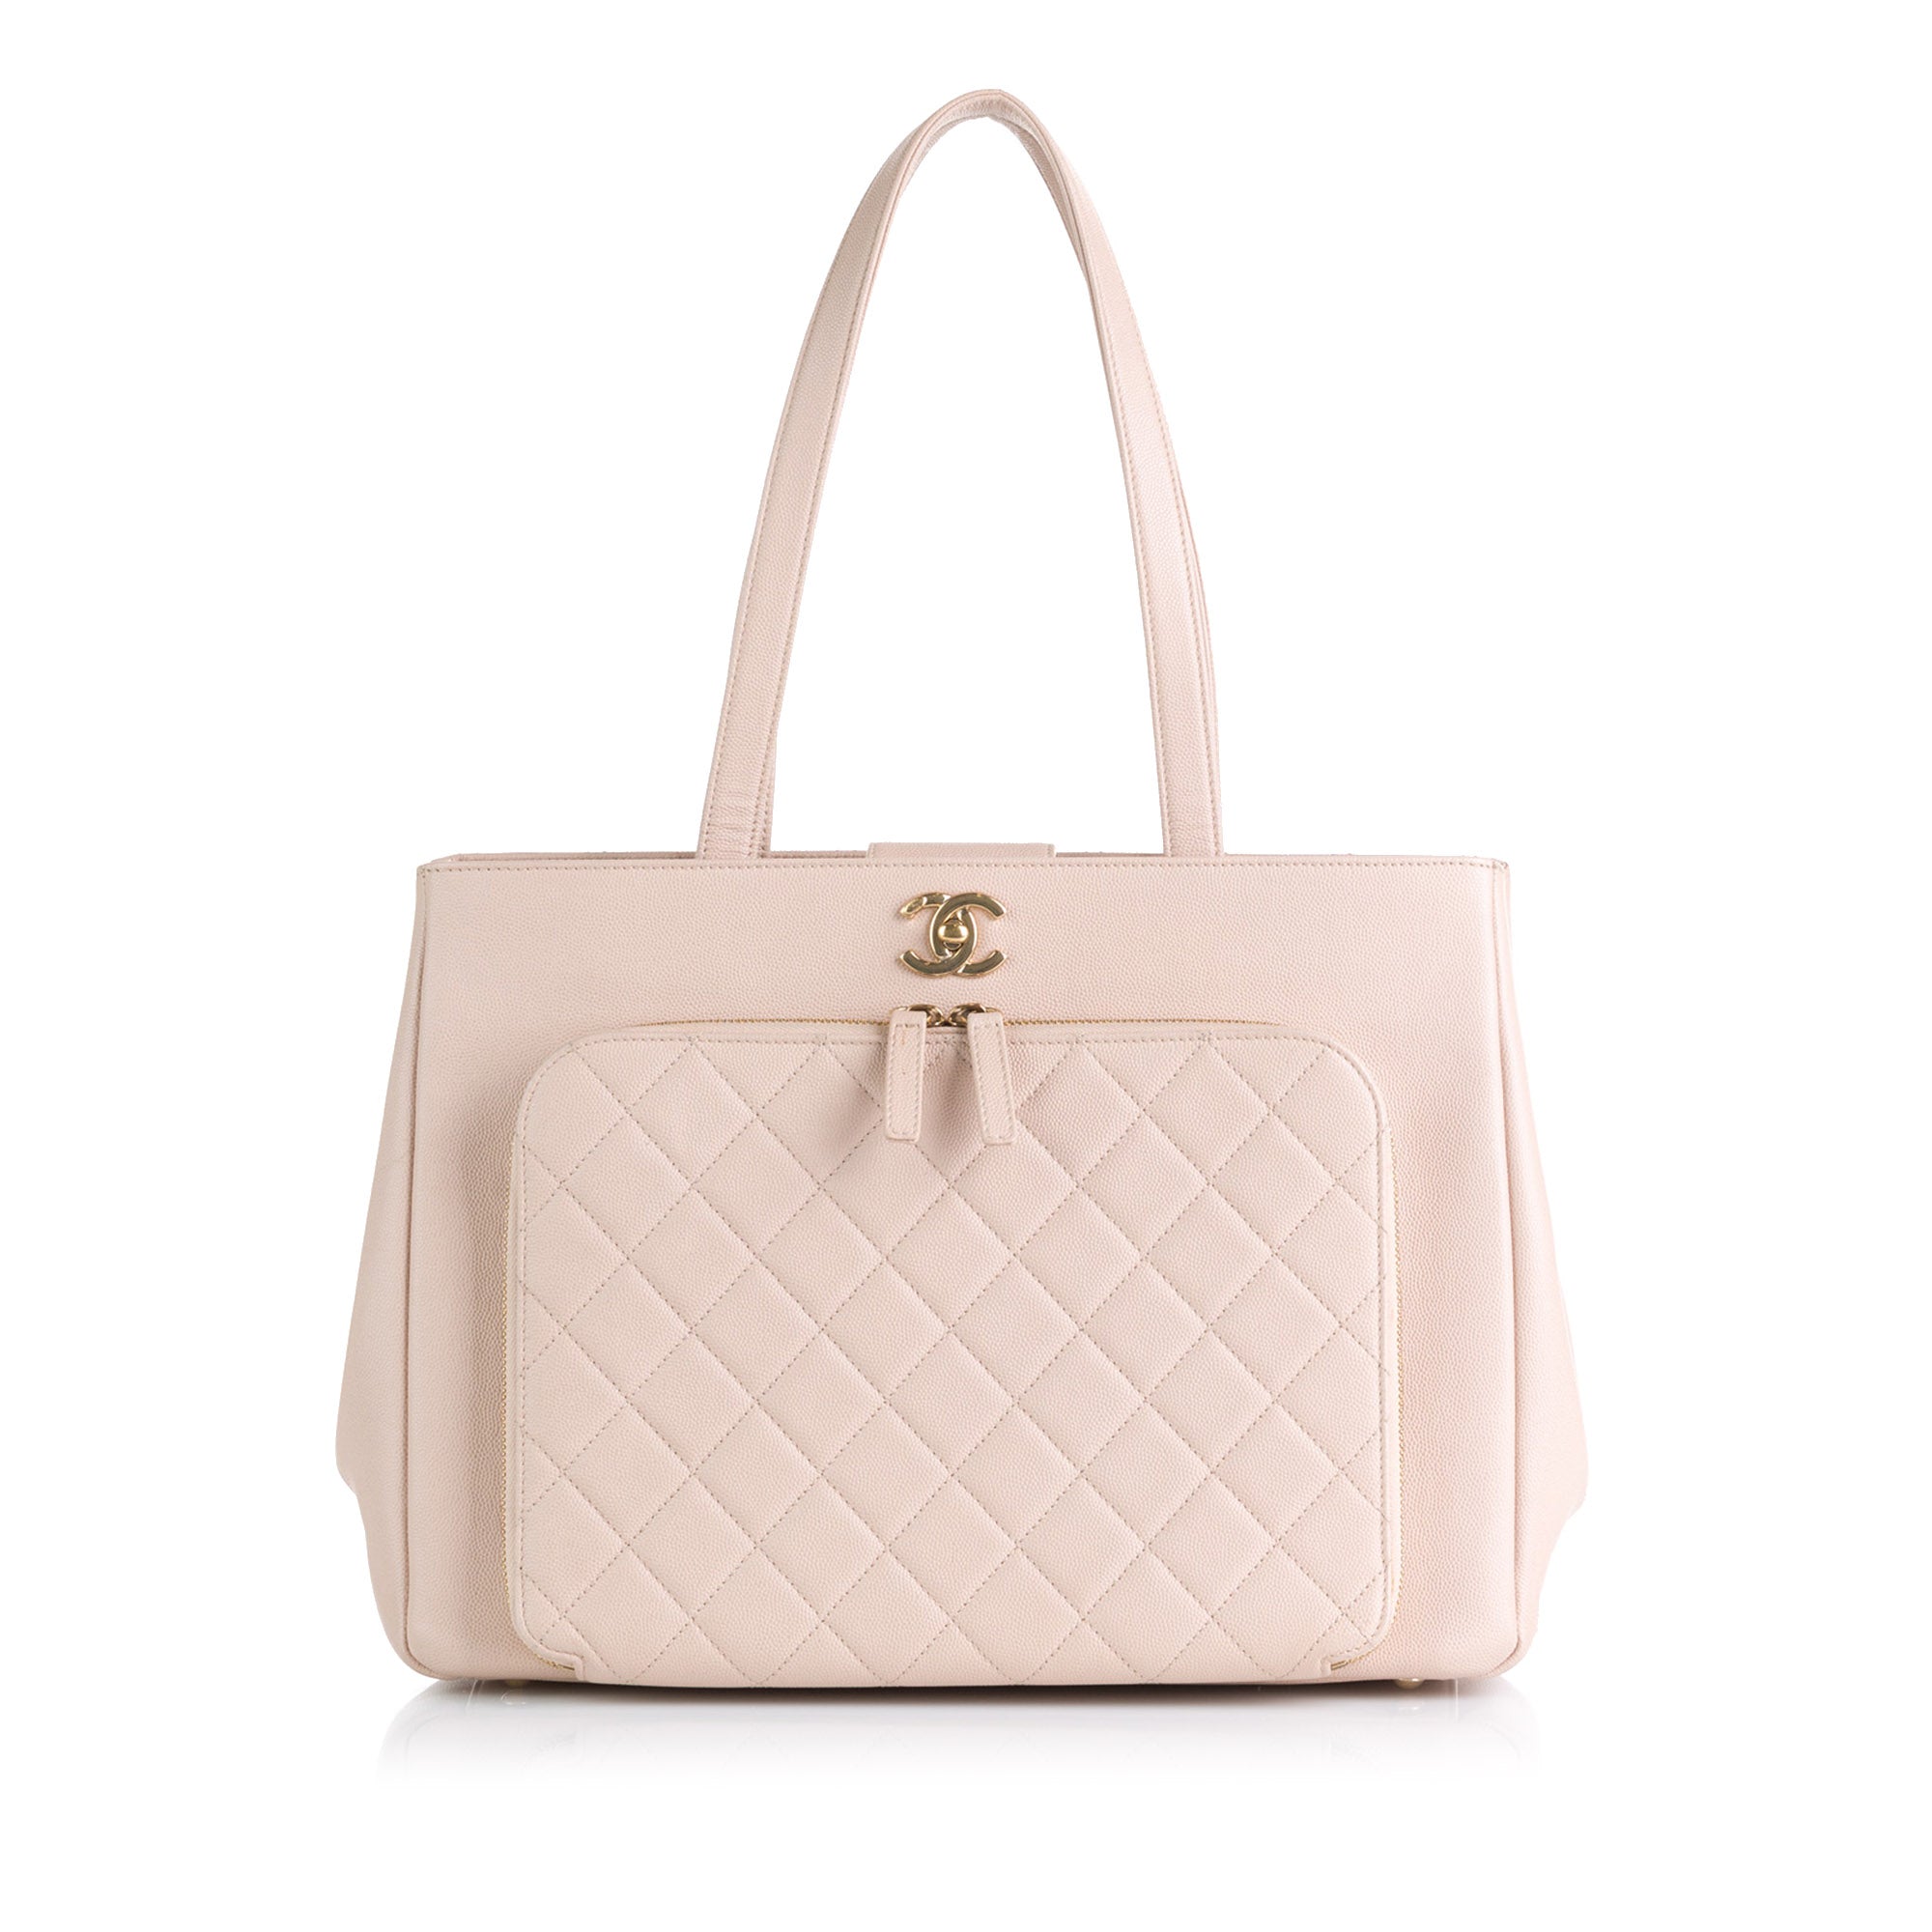 Authentic Chanel Business Affinity Bag in Beige Color